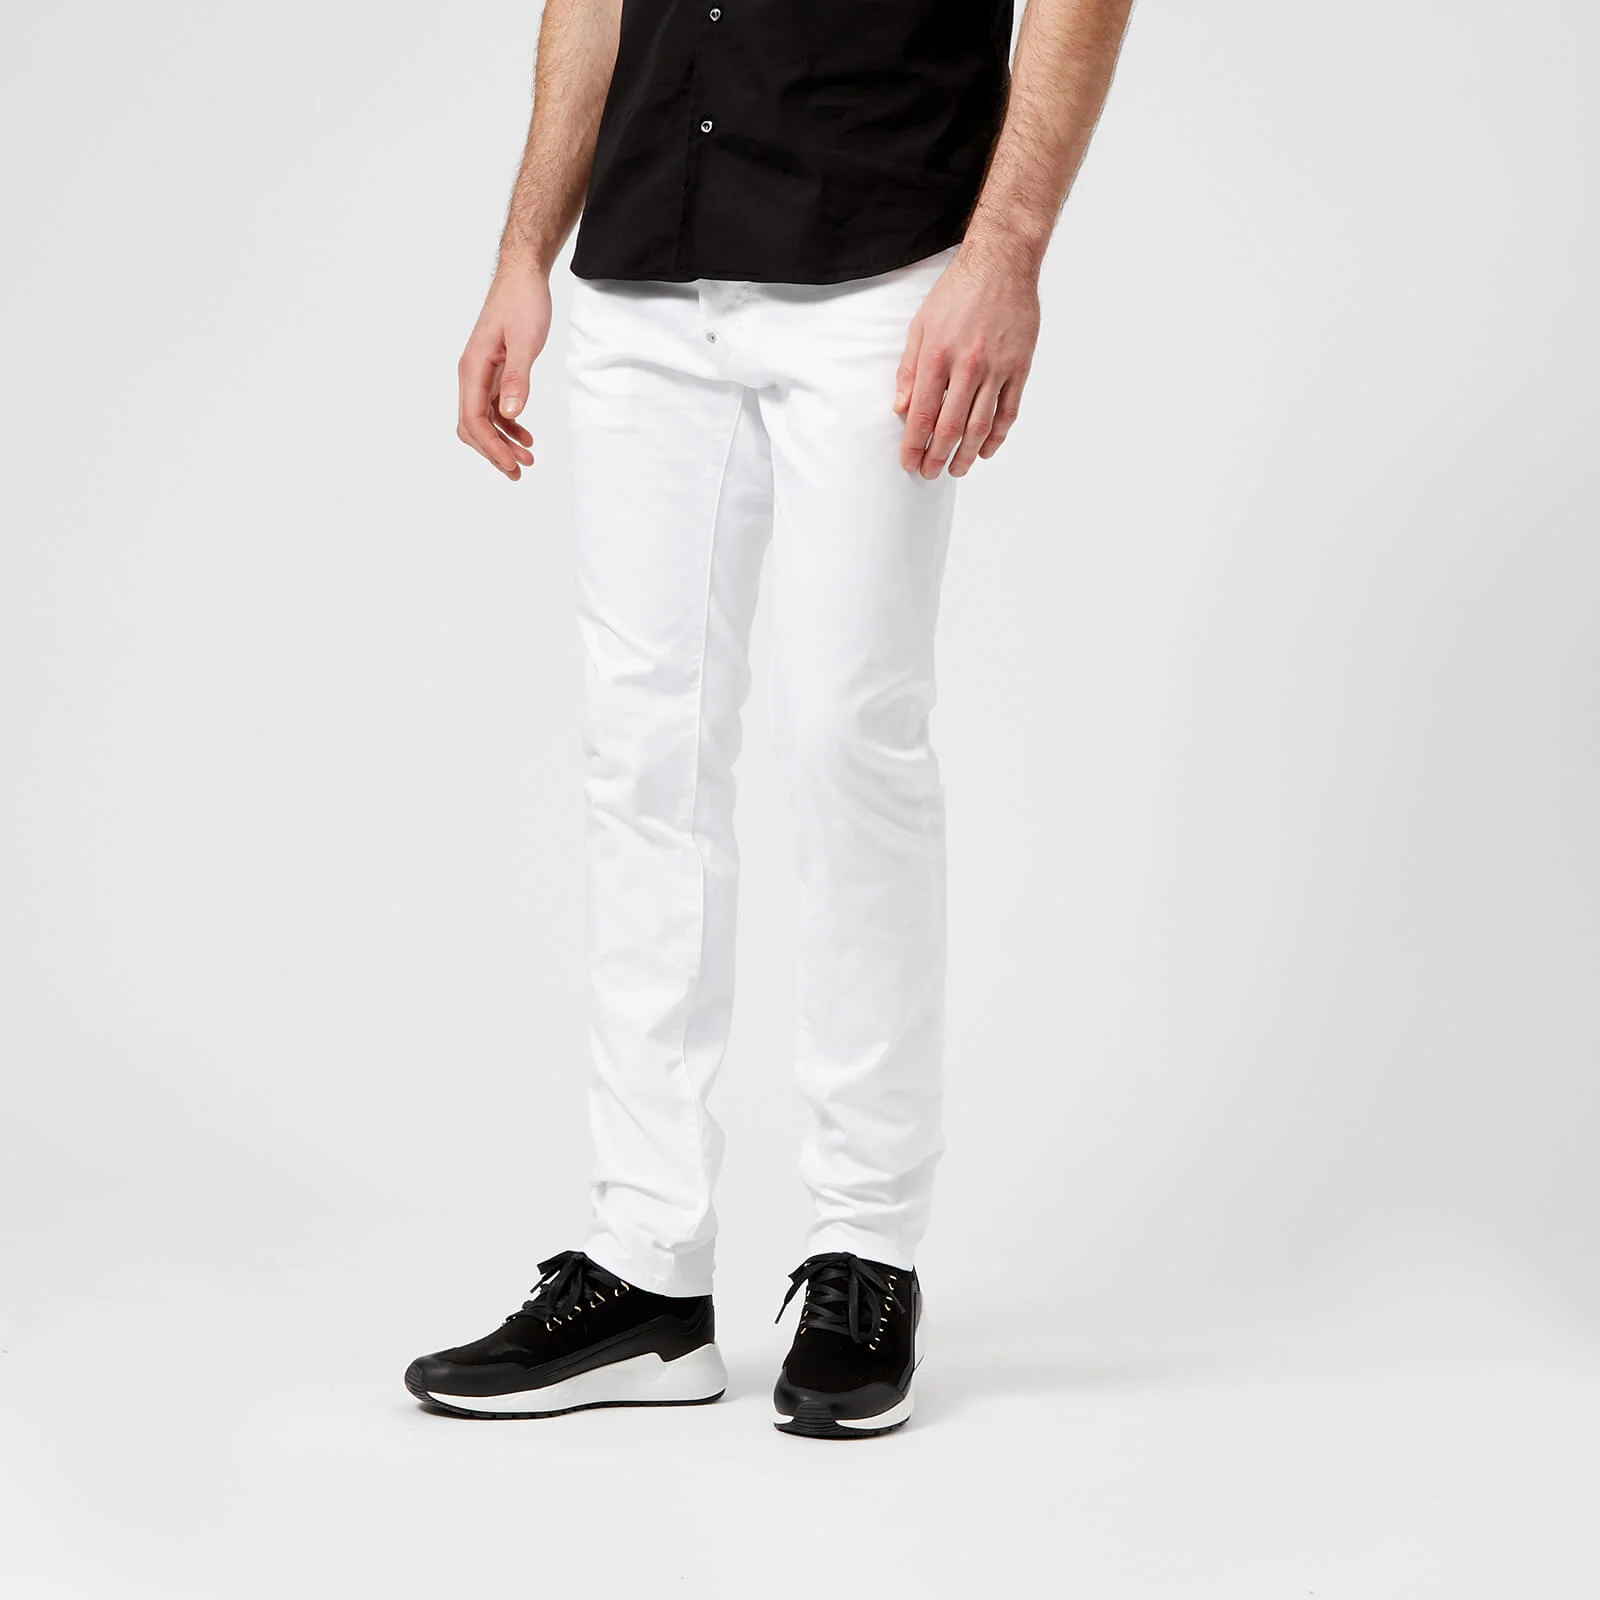 Dsquared2 Men's Cool Guy Jeans - White Image 1